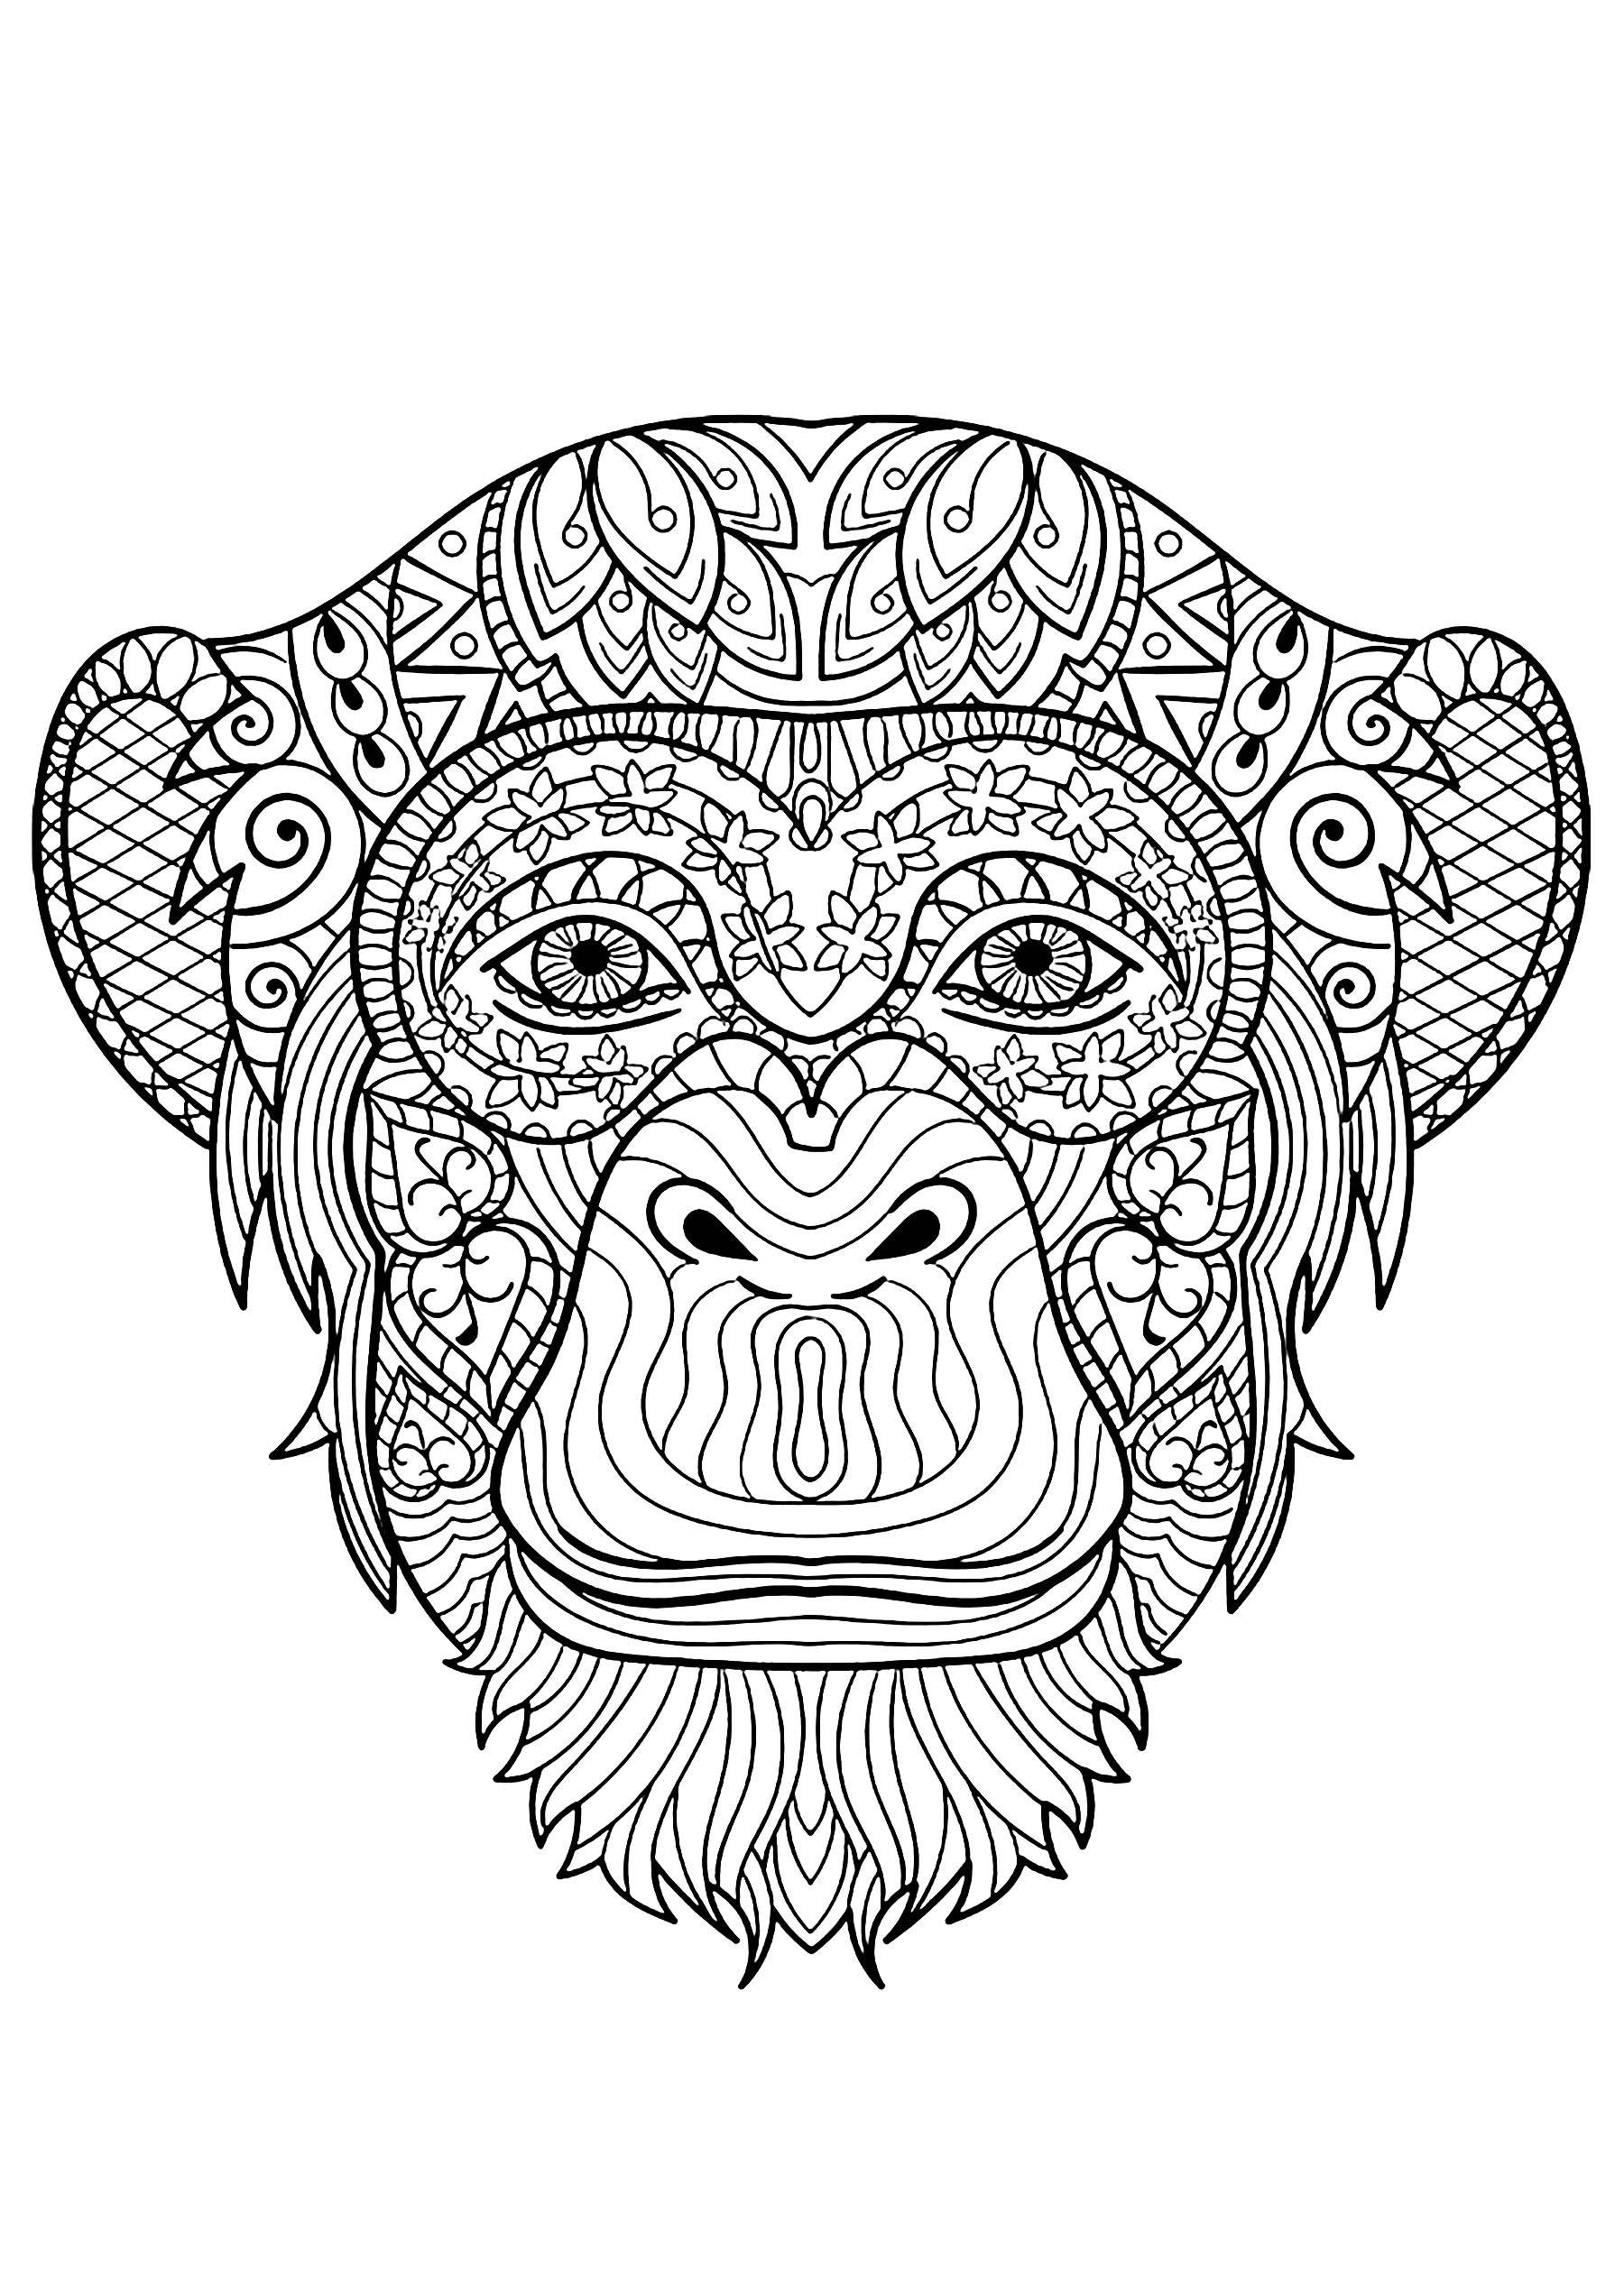 Monkey head - Monkeys Adult Coloring Pages